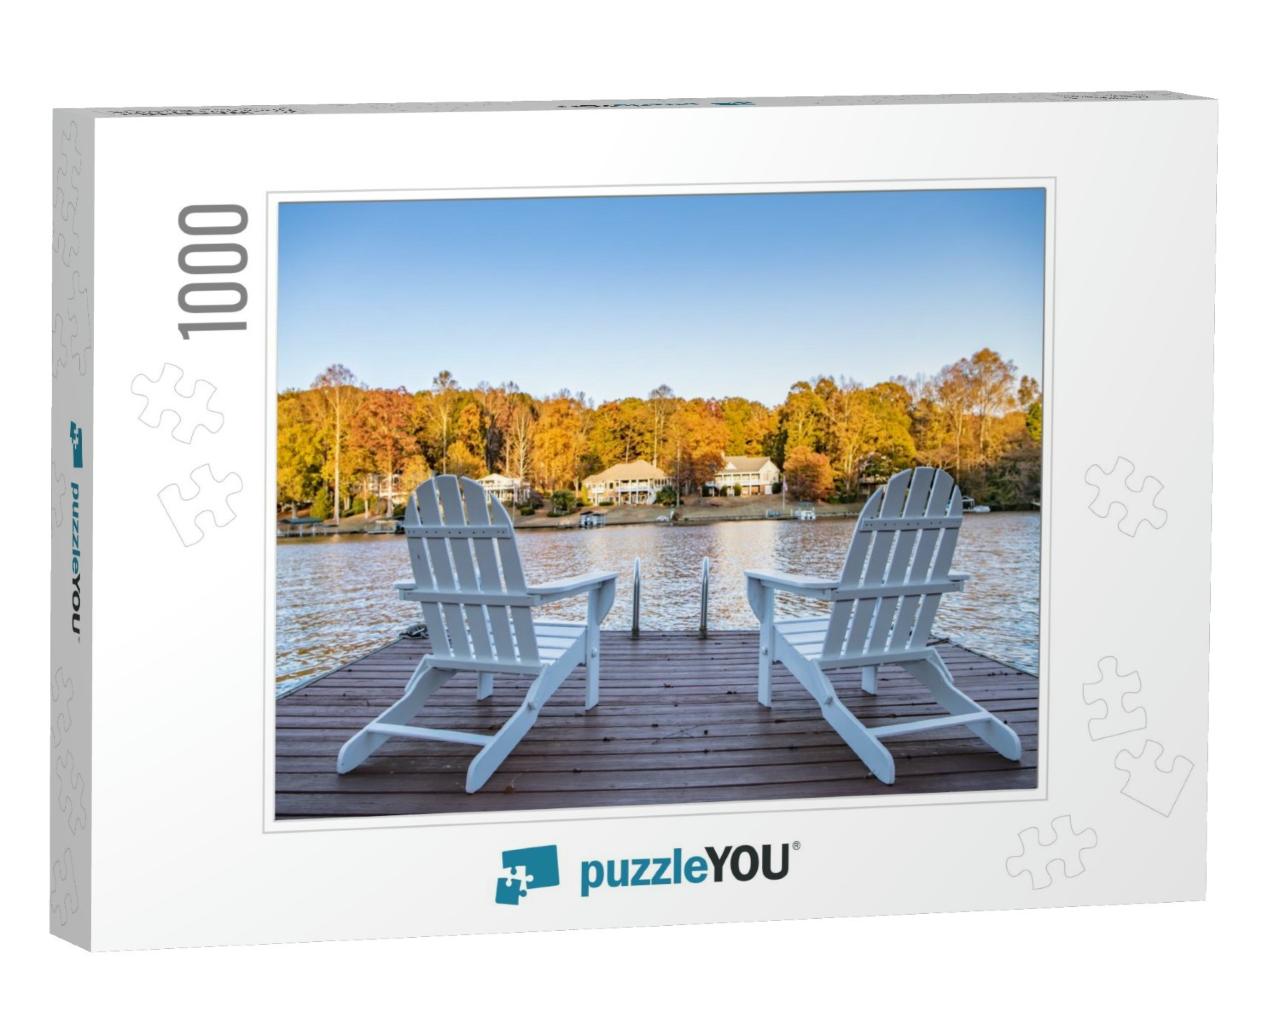 Adirondack Style Chairs on a Dock, Overlooking a Beautifu... Jigsaw Puzzle with 1000 pieces